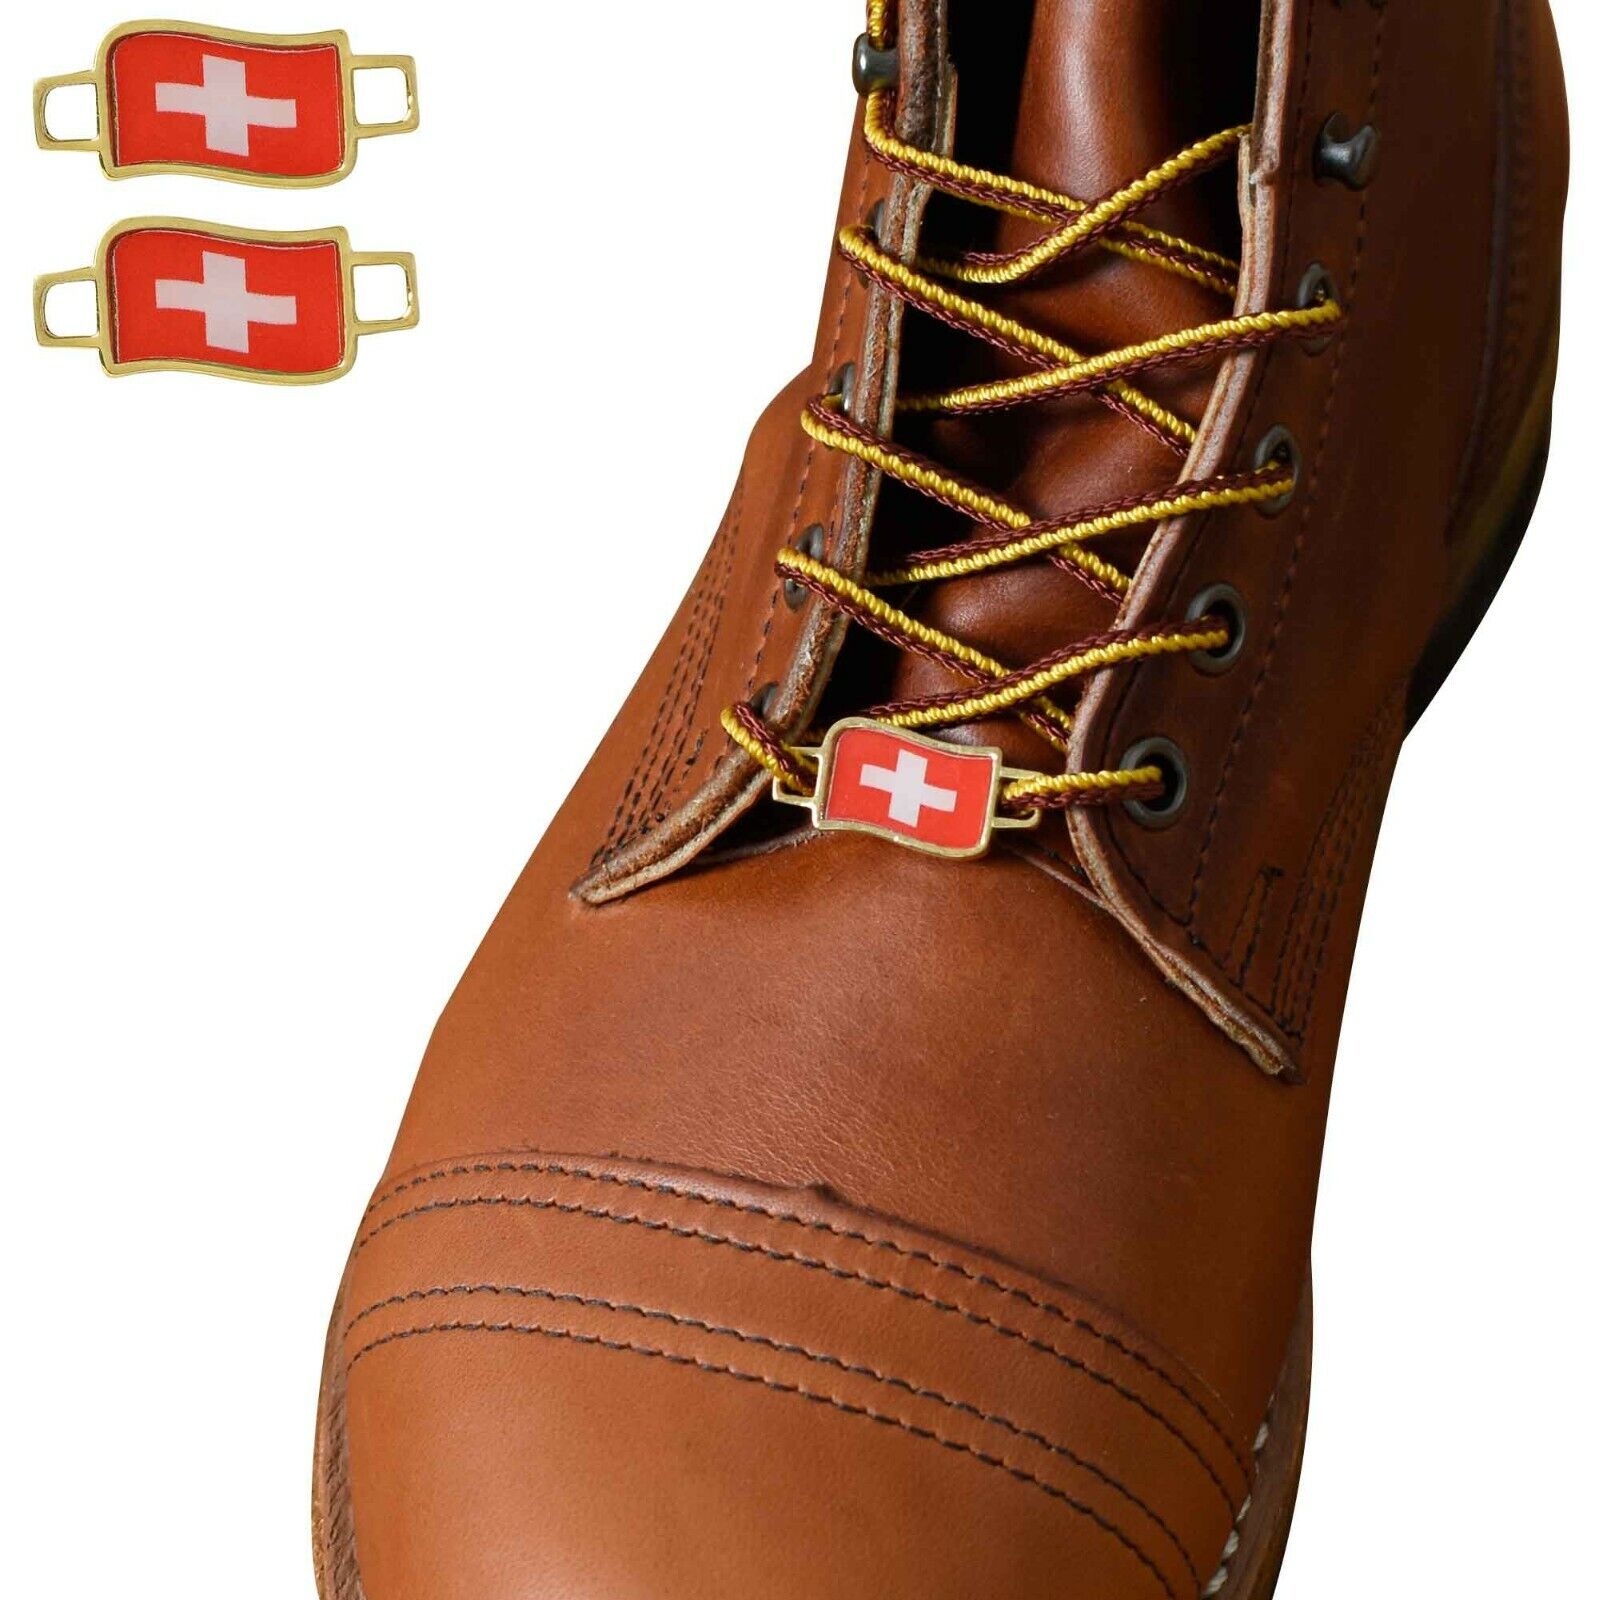 Switzerland Flags Shoes Boot Shoelace Keeper Holder Charm BrooklynMaker